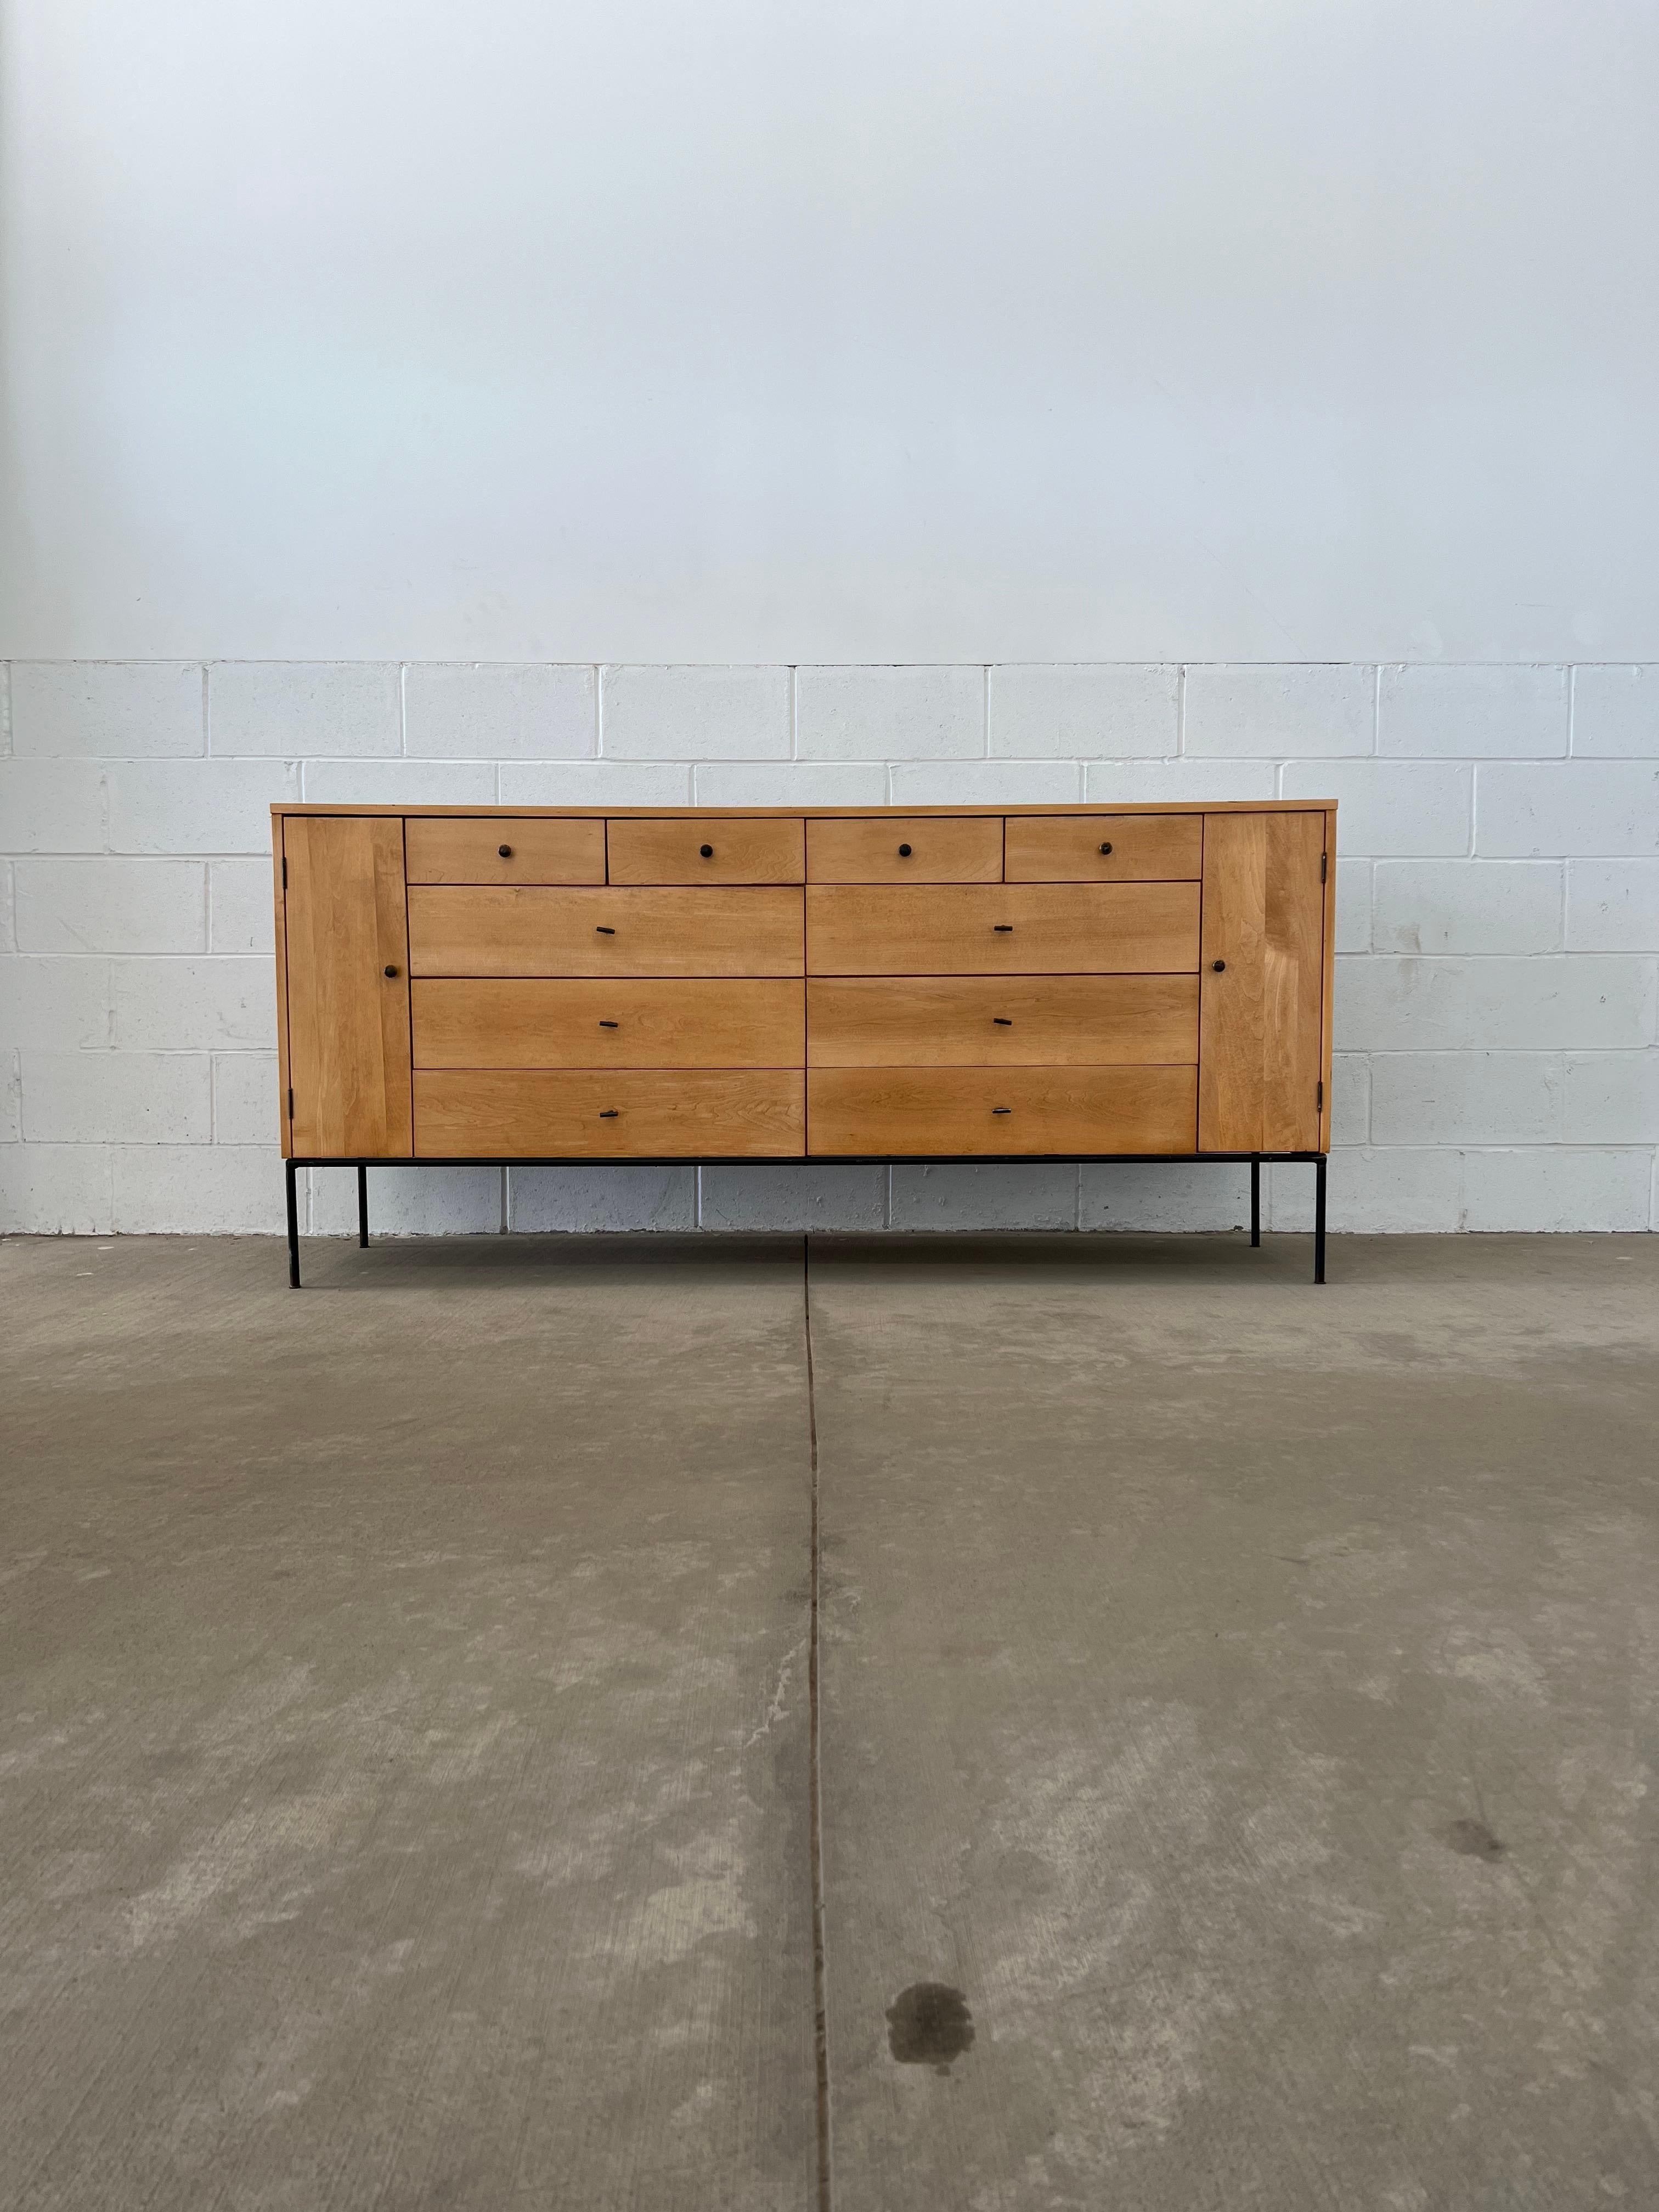 20 Drawer Mr. and Mrs. dresser (Model 1510) by Paul McCobb for Winchendon Furniture.